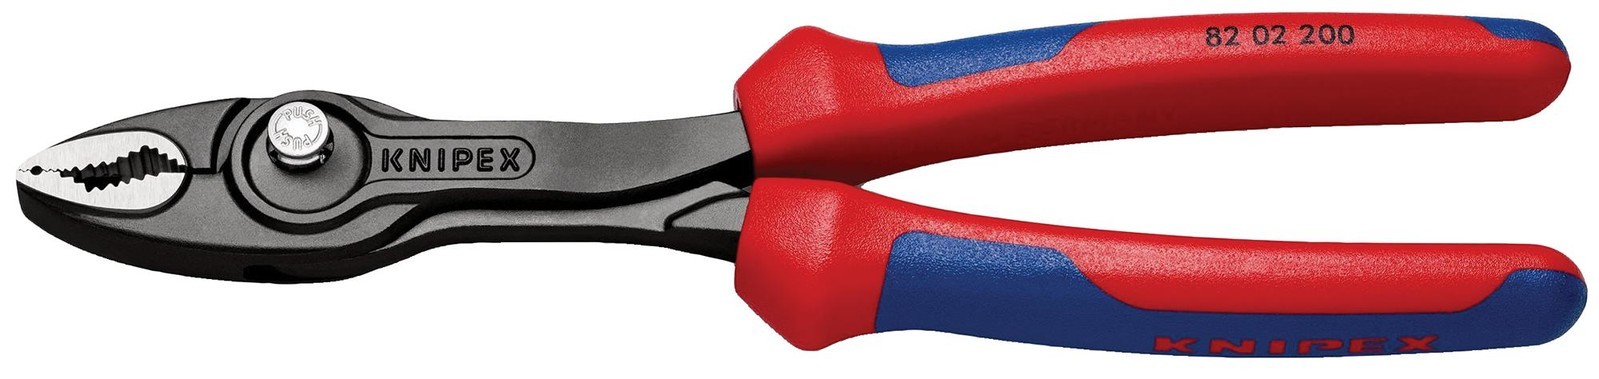 Knipex 82 02 200 Plier, Twingrip Slip Joint, 200mm, 22mm